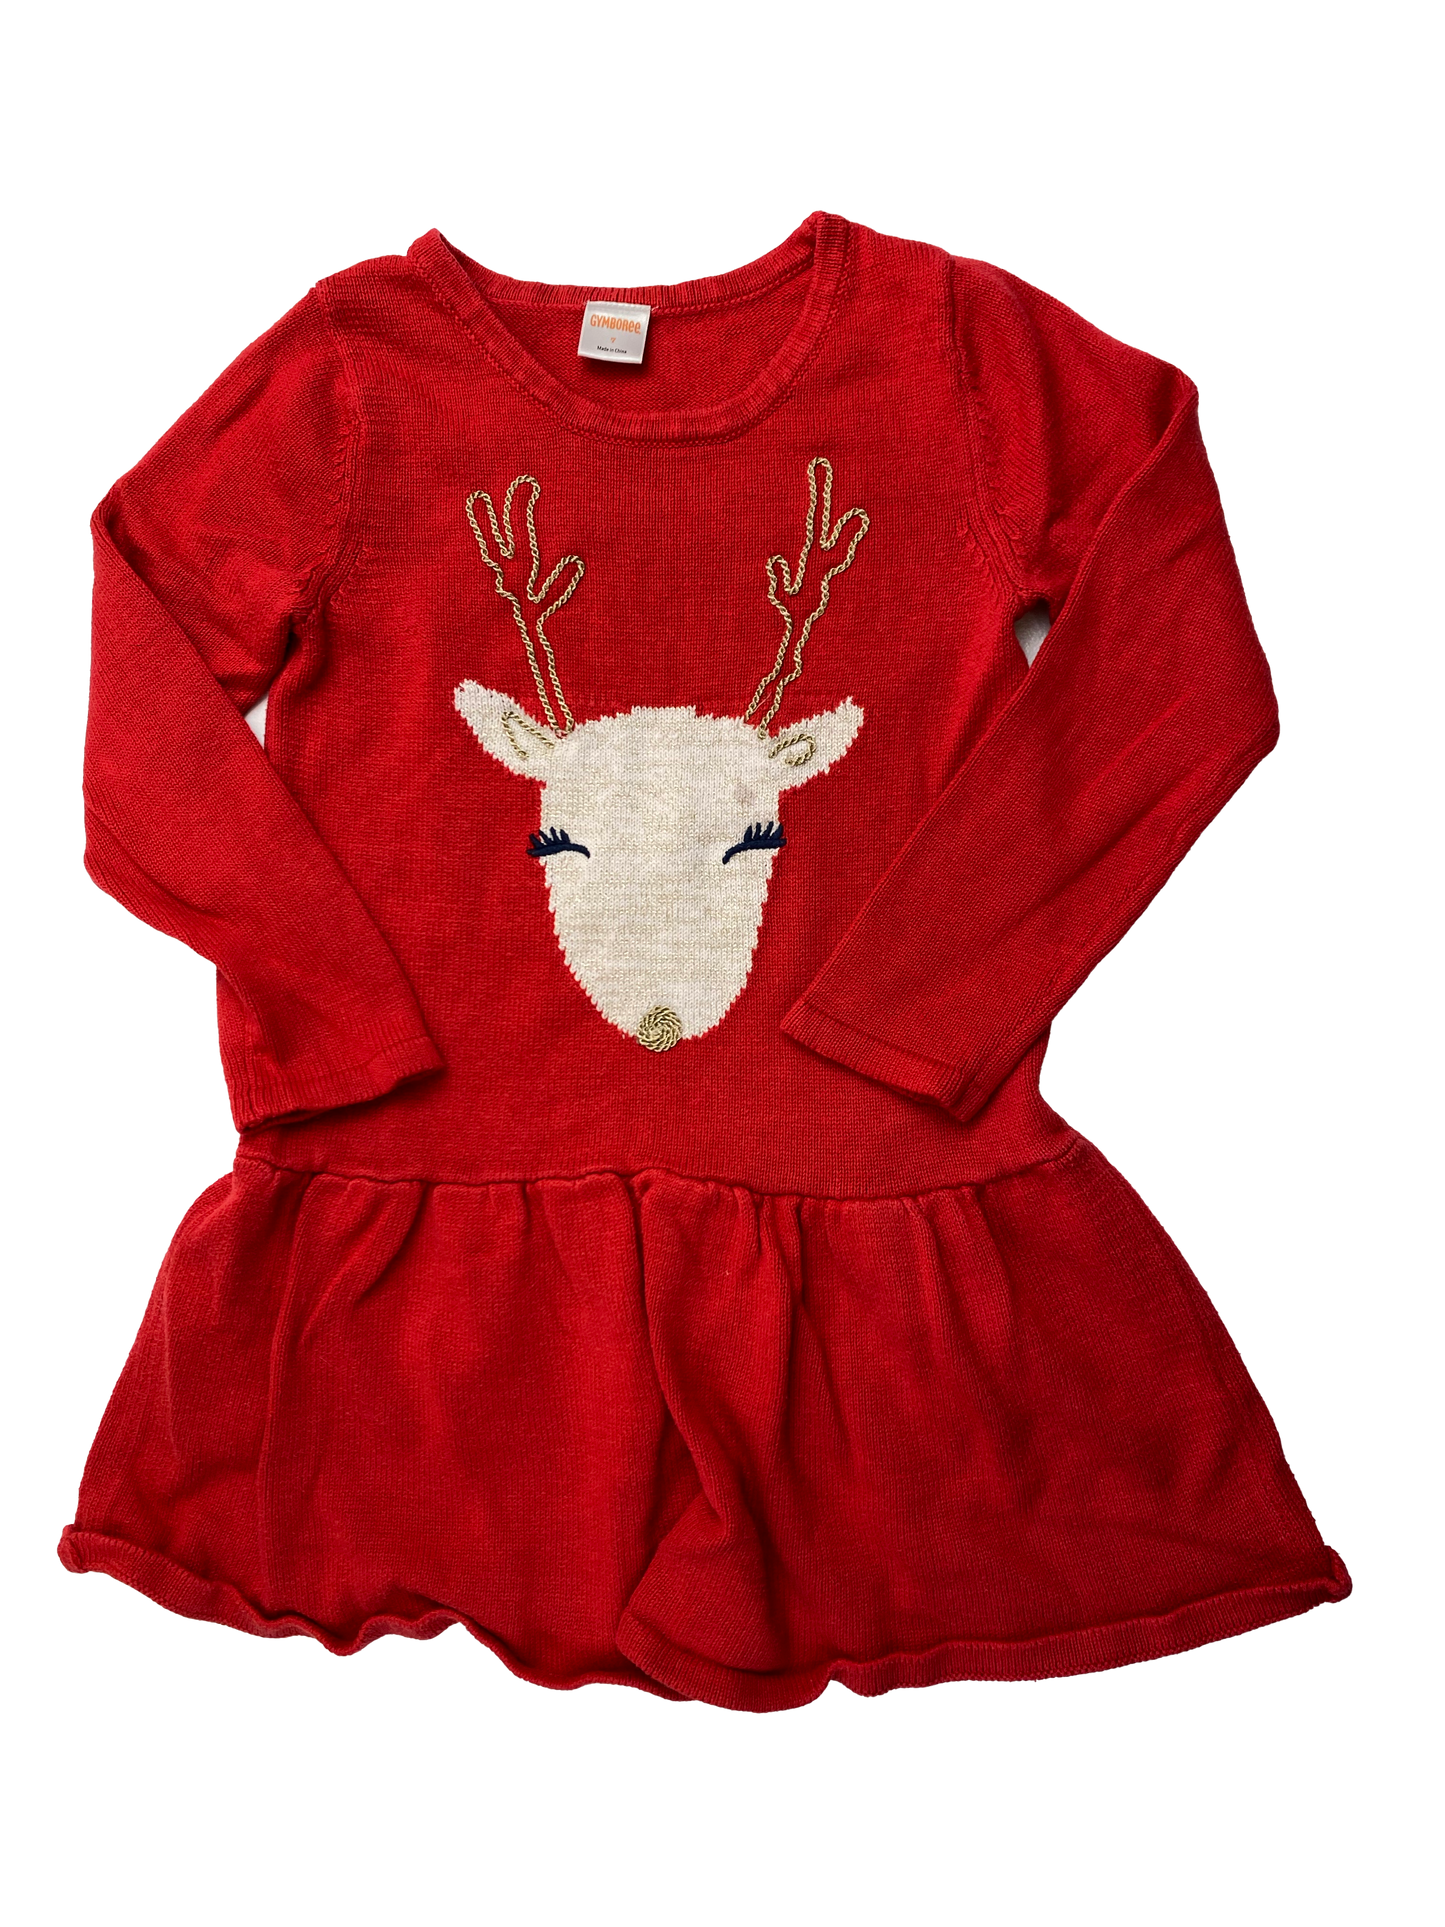 Gymboree Red Sweater with Reindeer 7